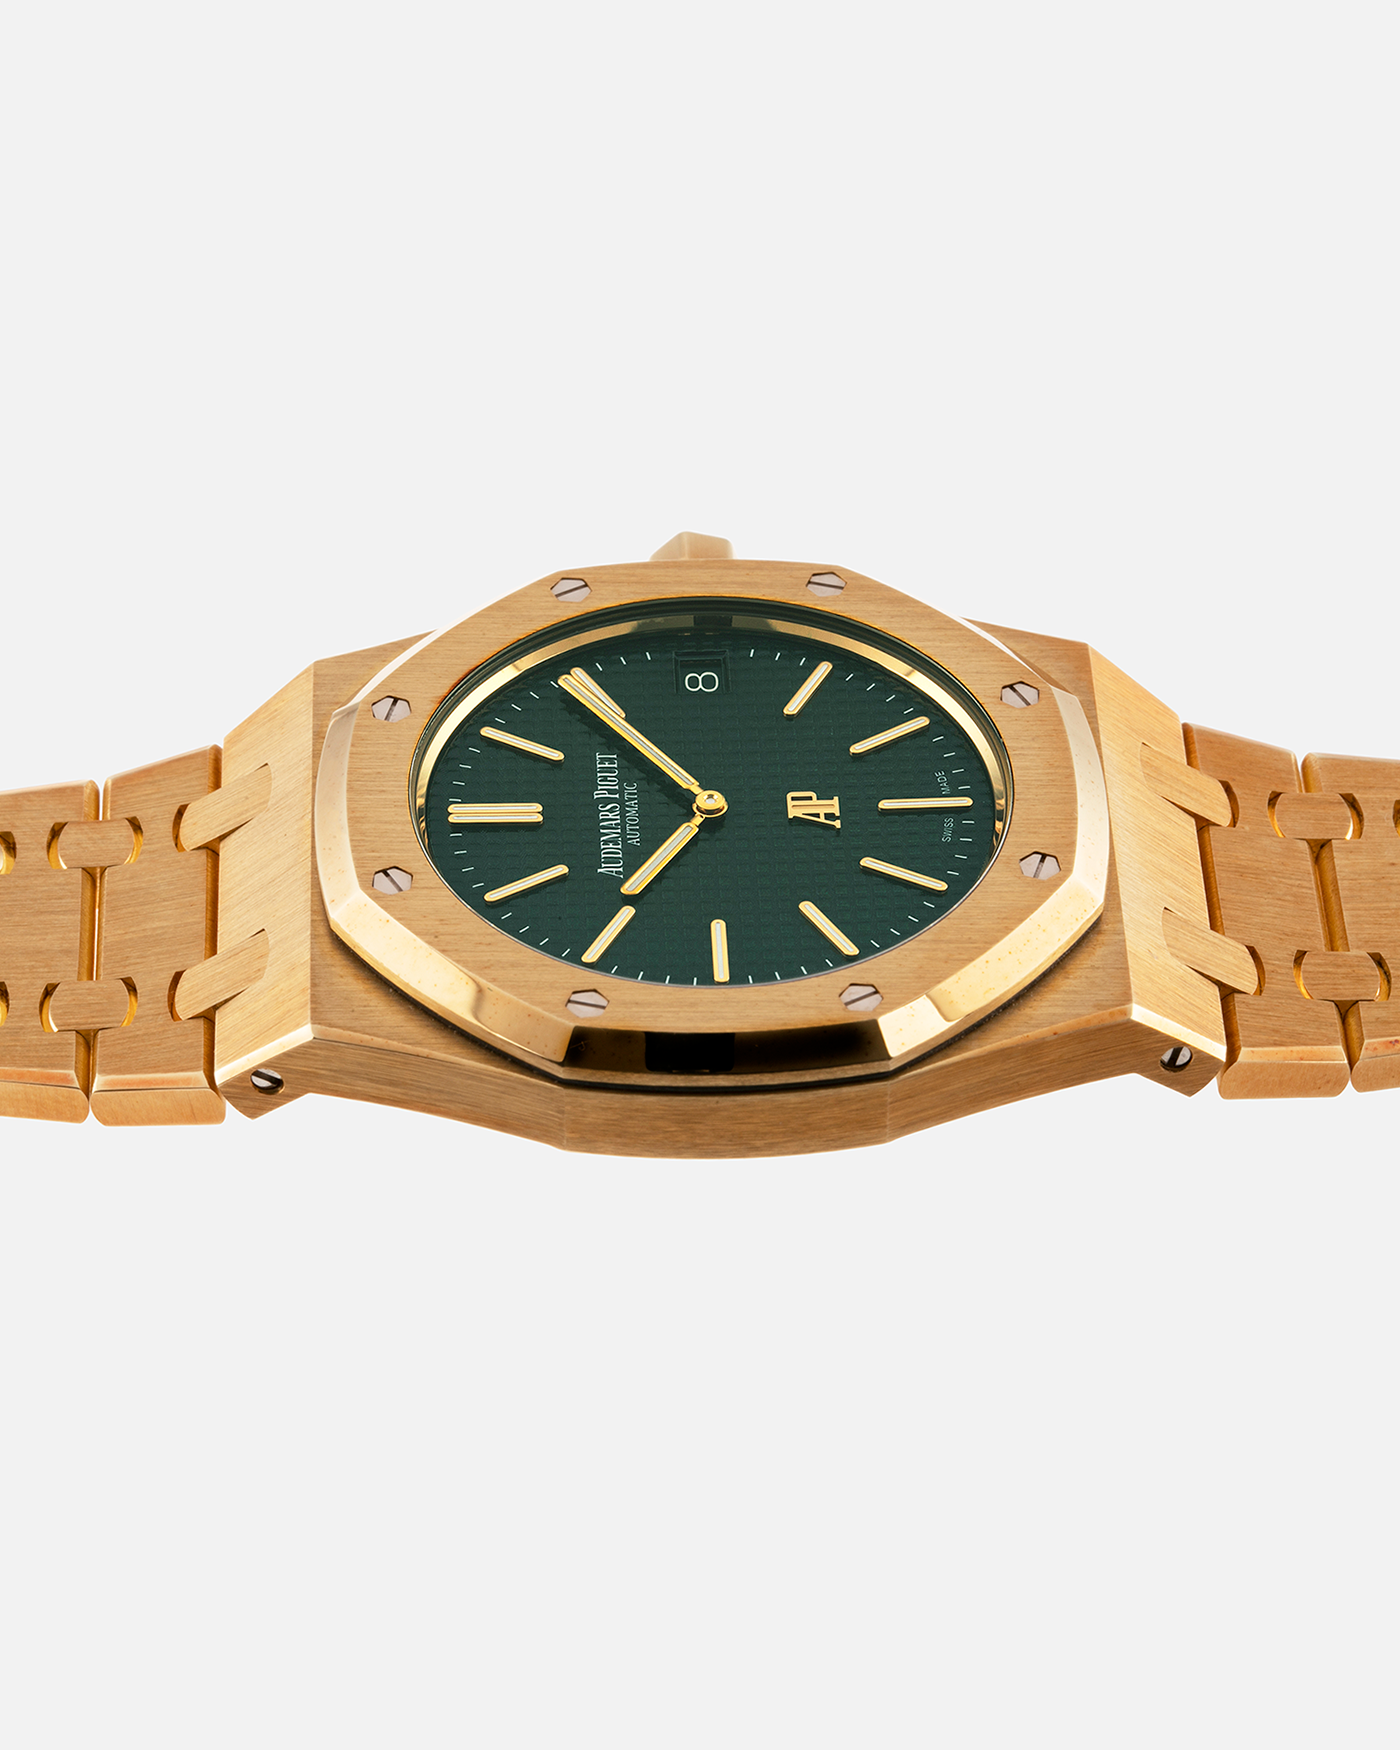 Brand: Audemars Piguet Year: 2015 Model: Royal Oak The Hour Glass Edition Reference Number: 15205 / 15202 Material: 18ct Yellow Gold Movement: Cal 2121 Case Diameter: 39mm Bracelet: Audemars Piguet Integrated 18ct Yellow Gold Bracelet